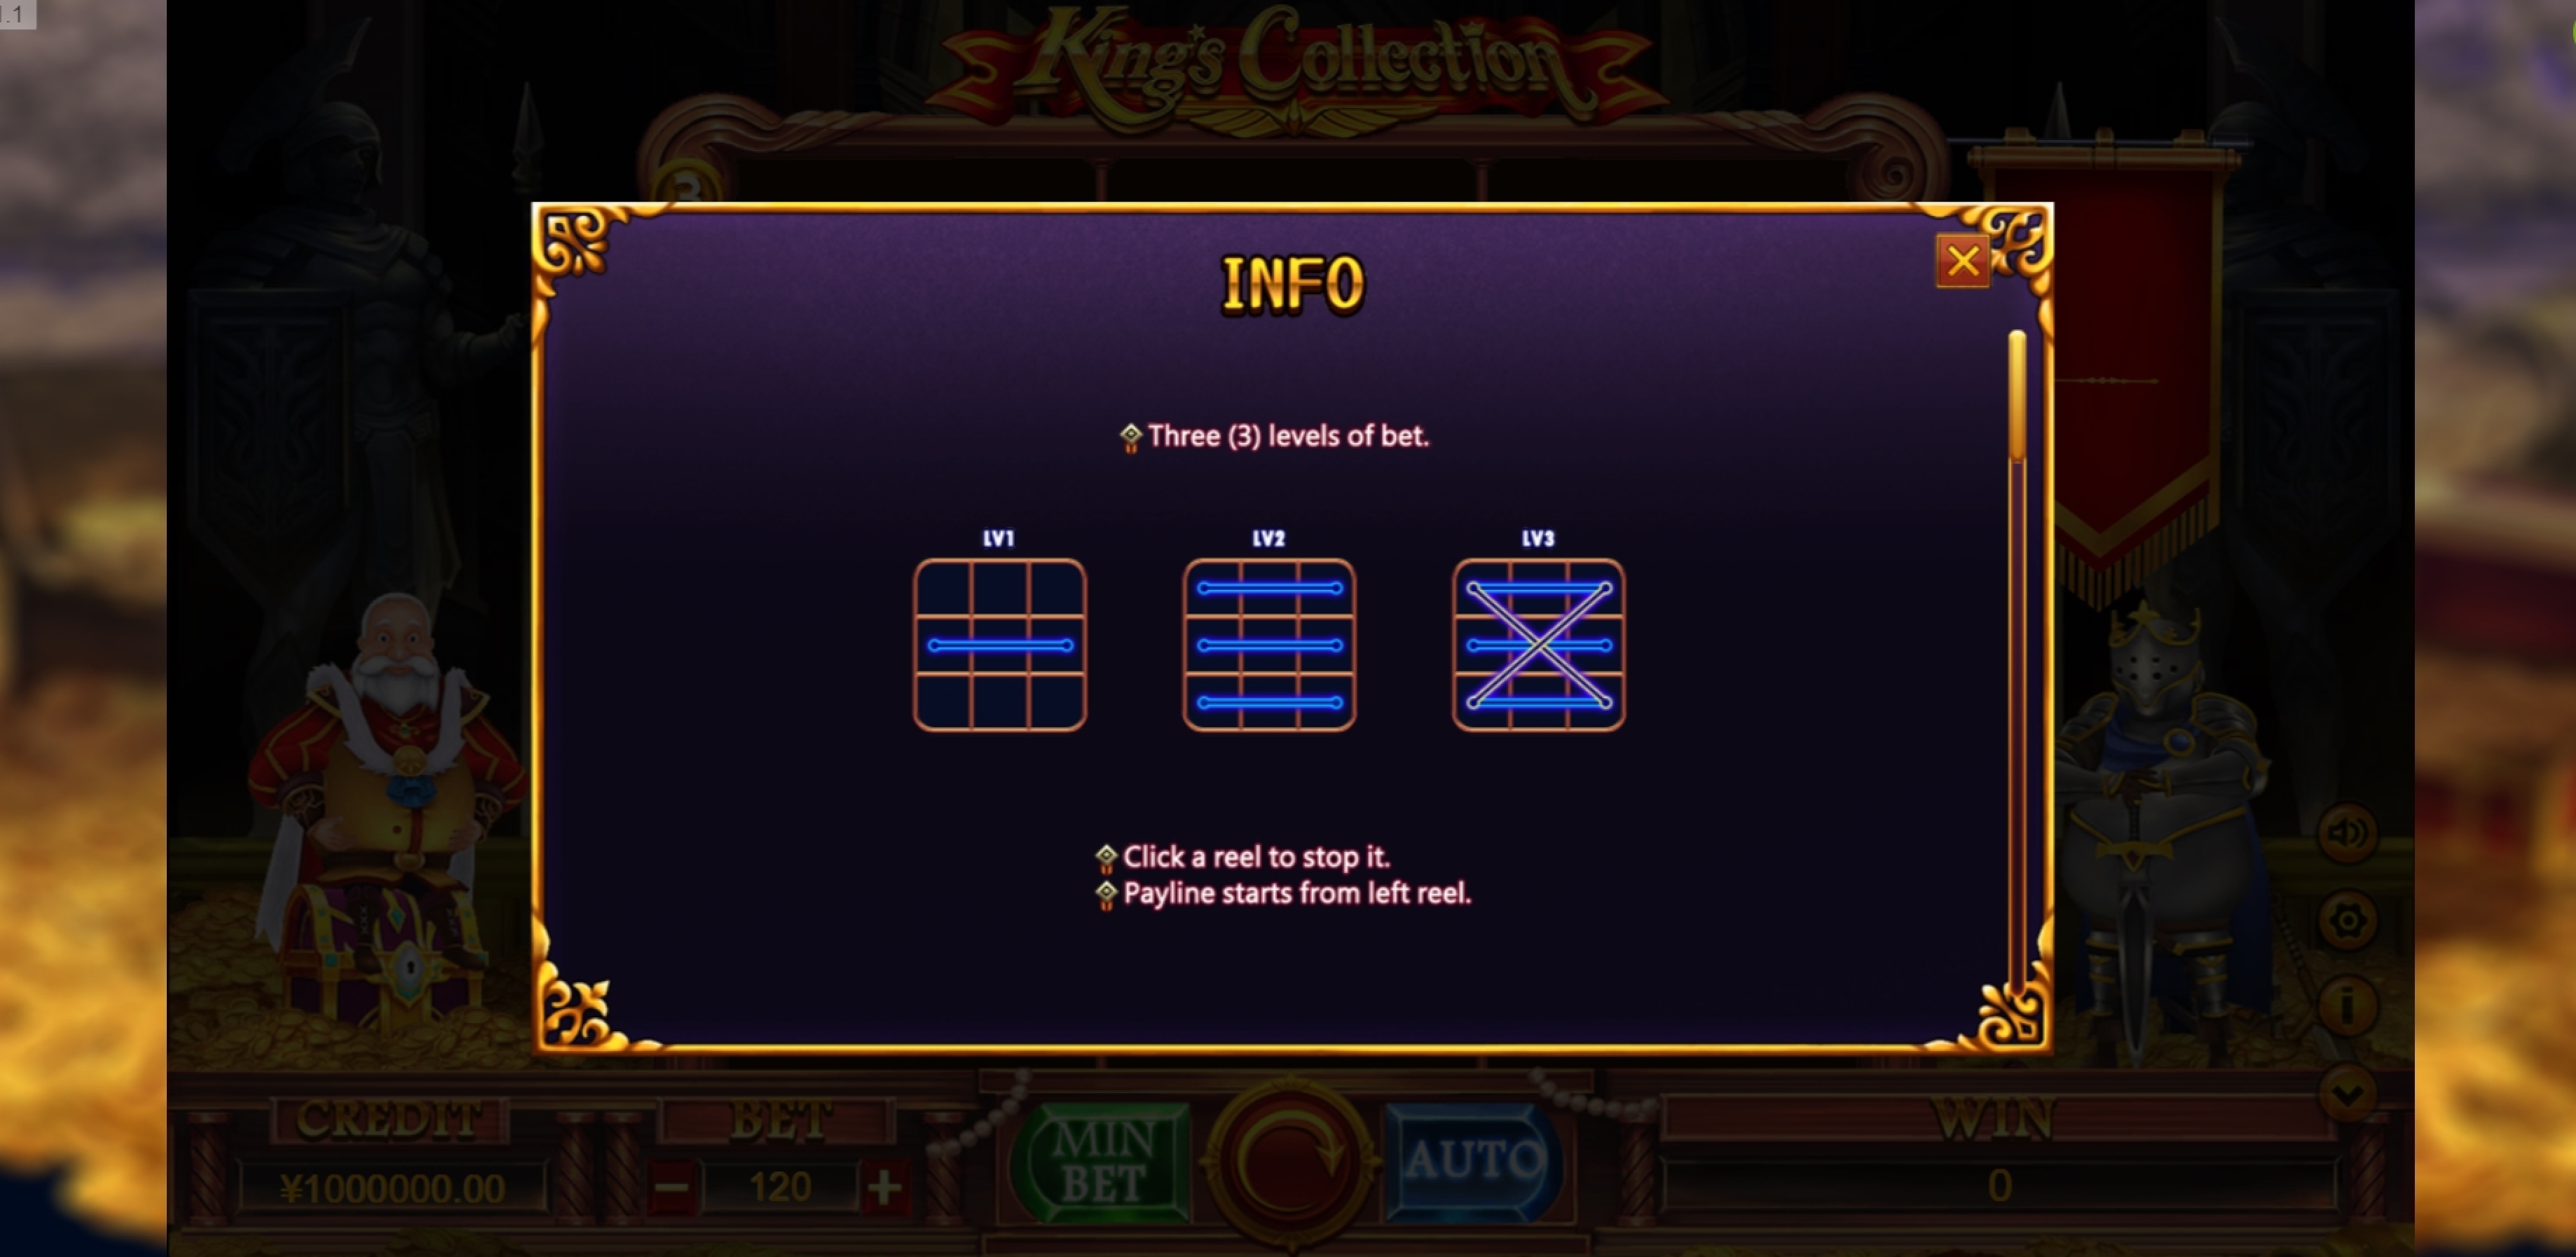 Info of King Collection Slot Game by TIDY